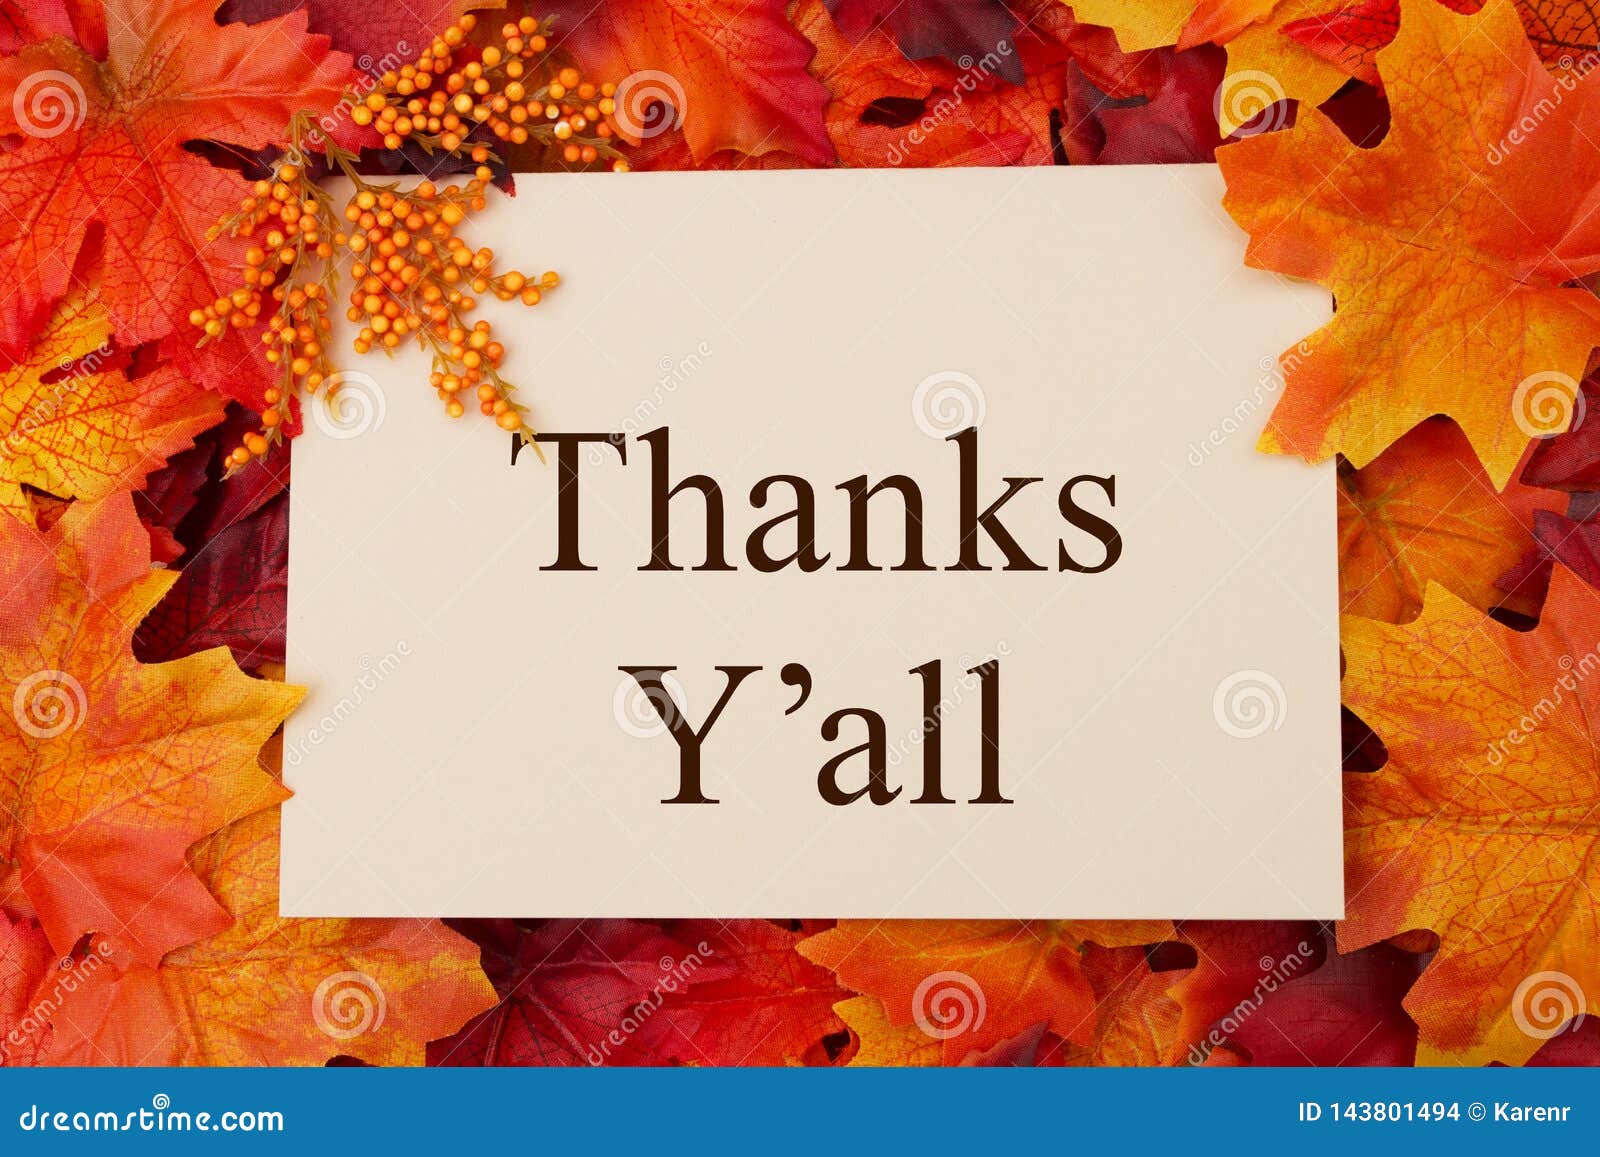 Thank You Greeting Card with Fall Leaves Stock Photo - Image of ...